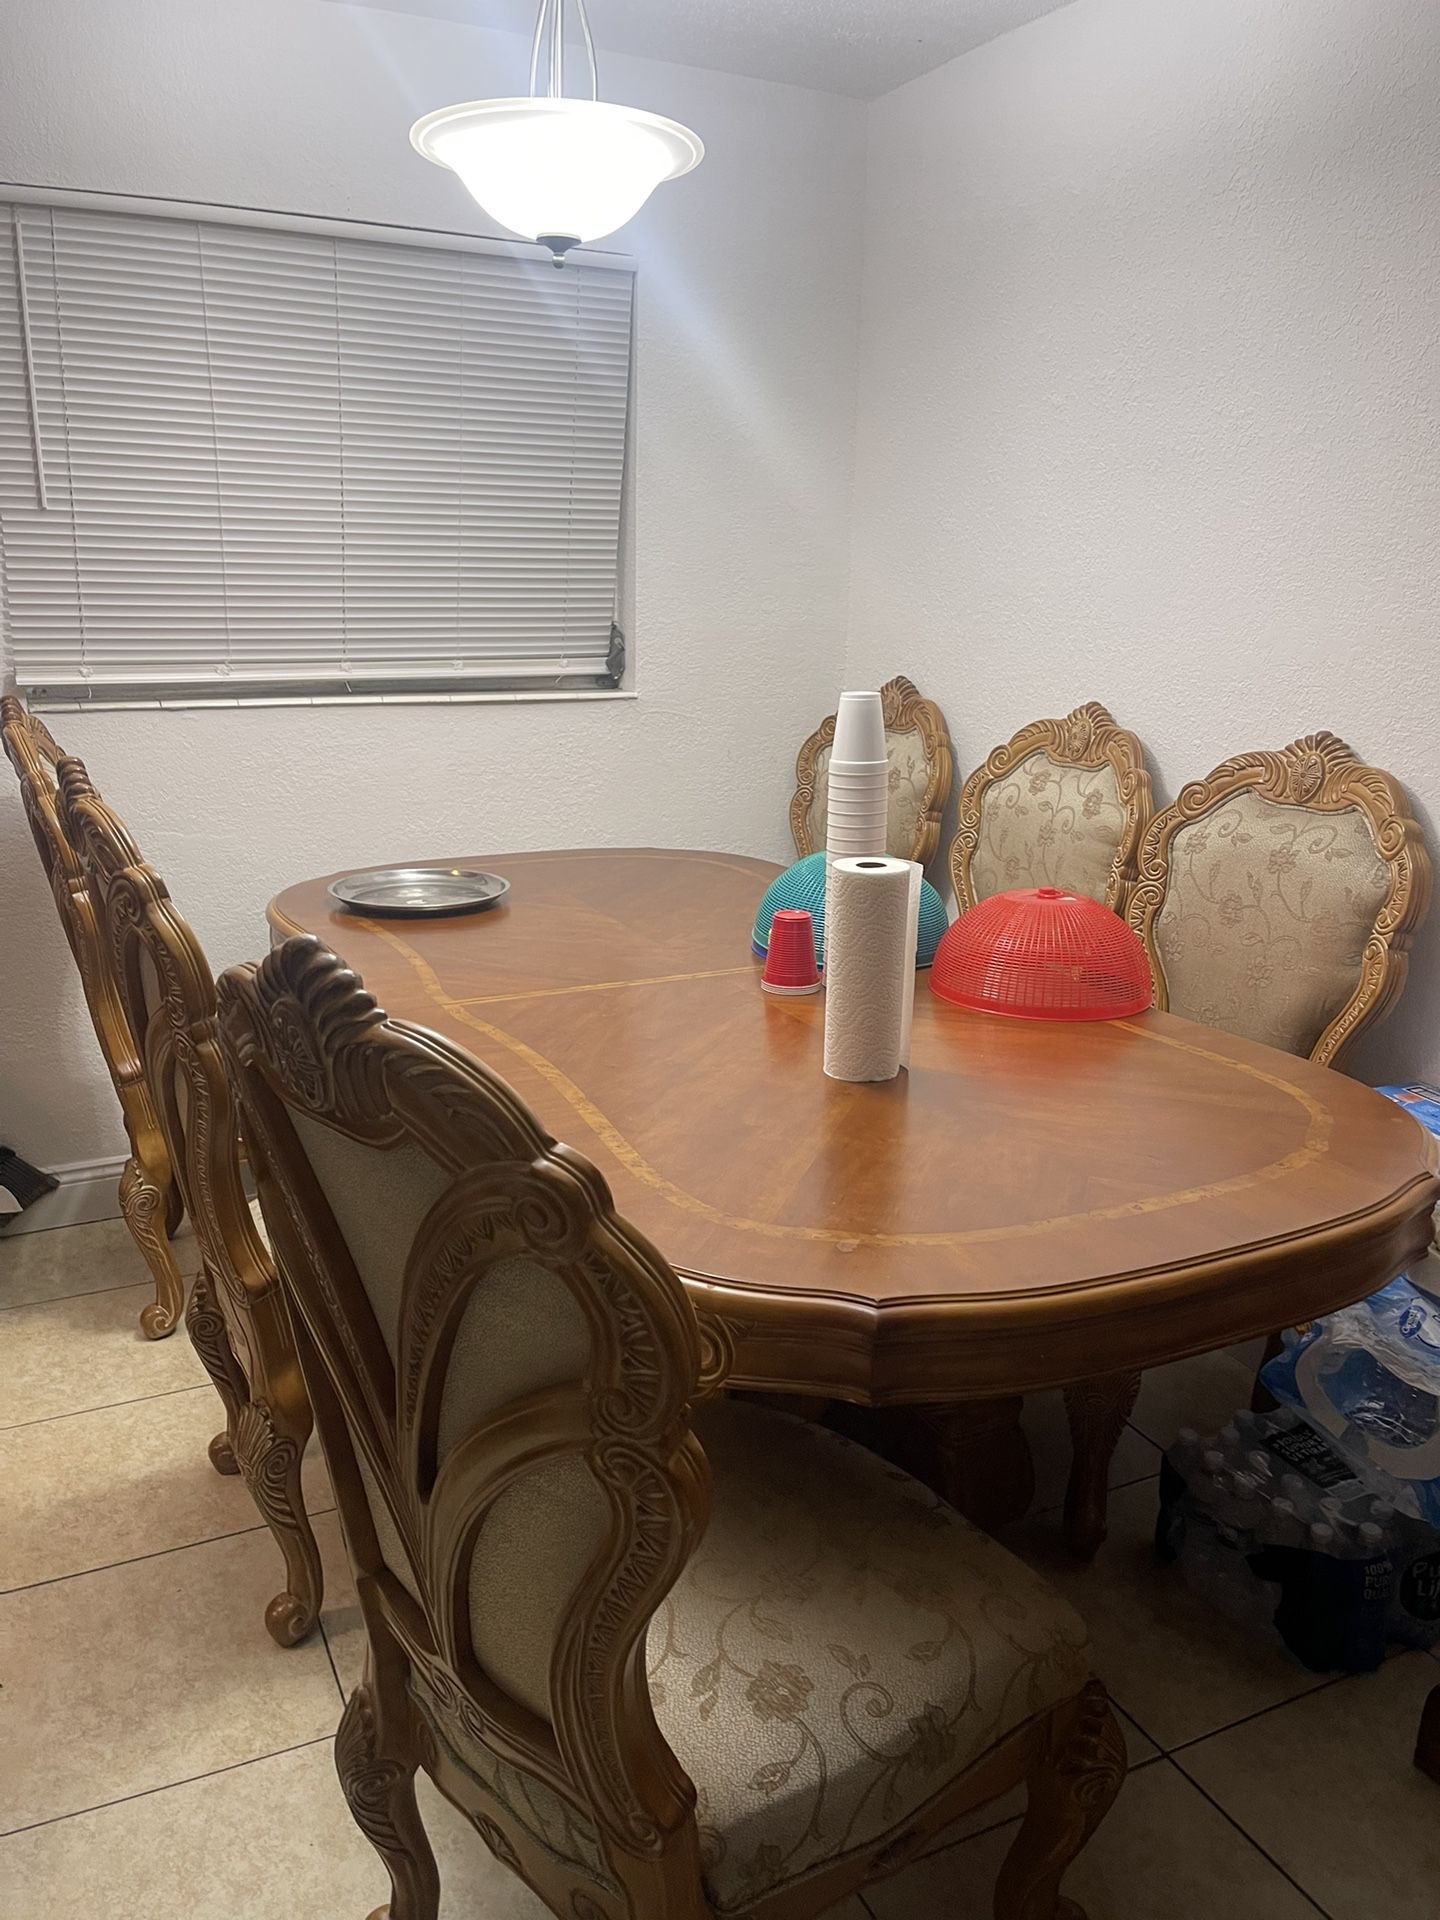 Brown dining table